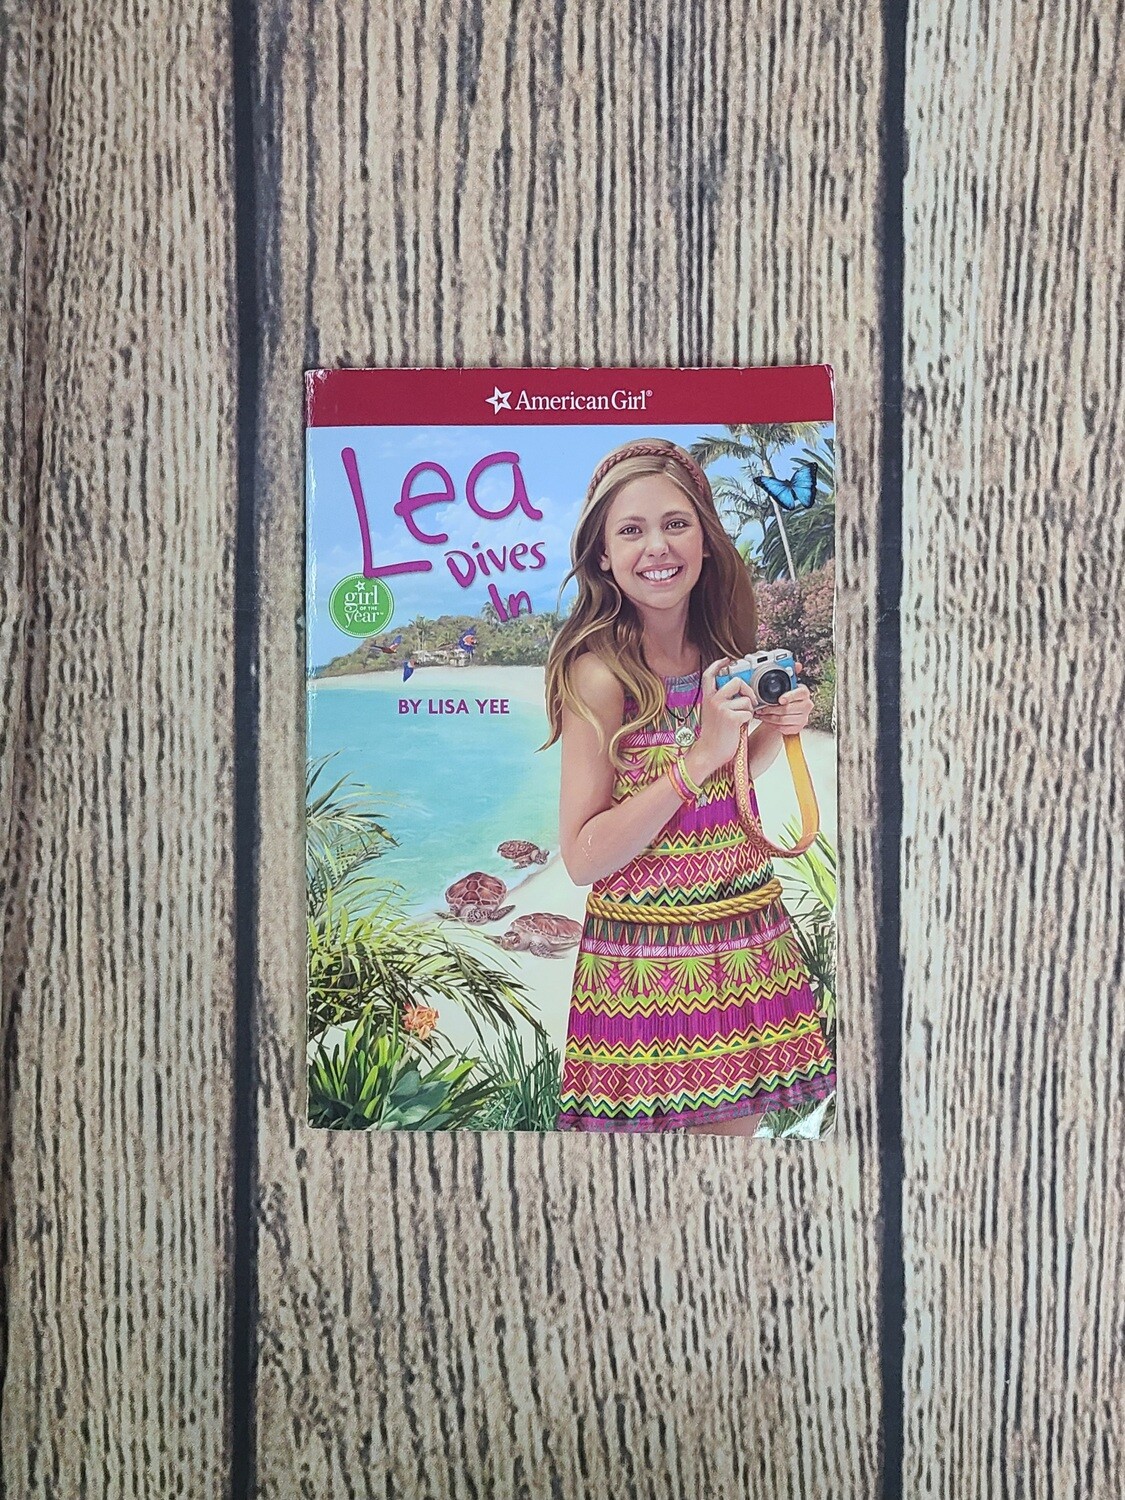 American Girl: Lea Dives In by Lisa Yee - Paperback - Great Condition